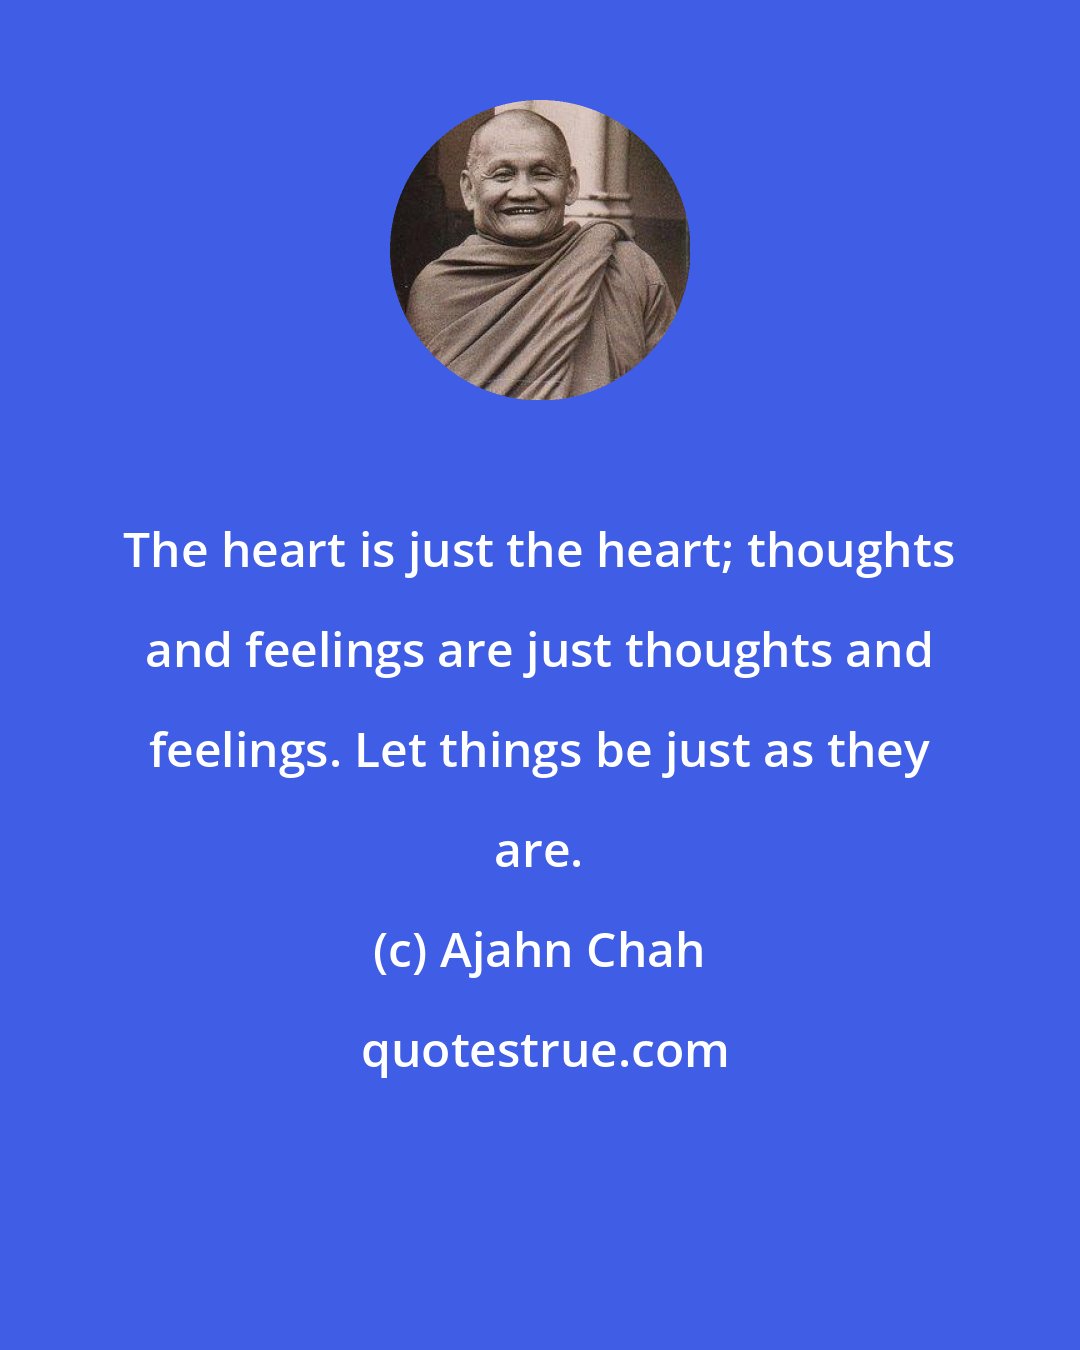 Ajahn Chah: The heart is just the heart; thoughts and feelings are just thoughts and feelings. Let things be just as they are.